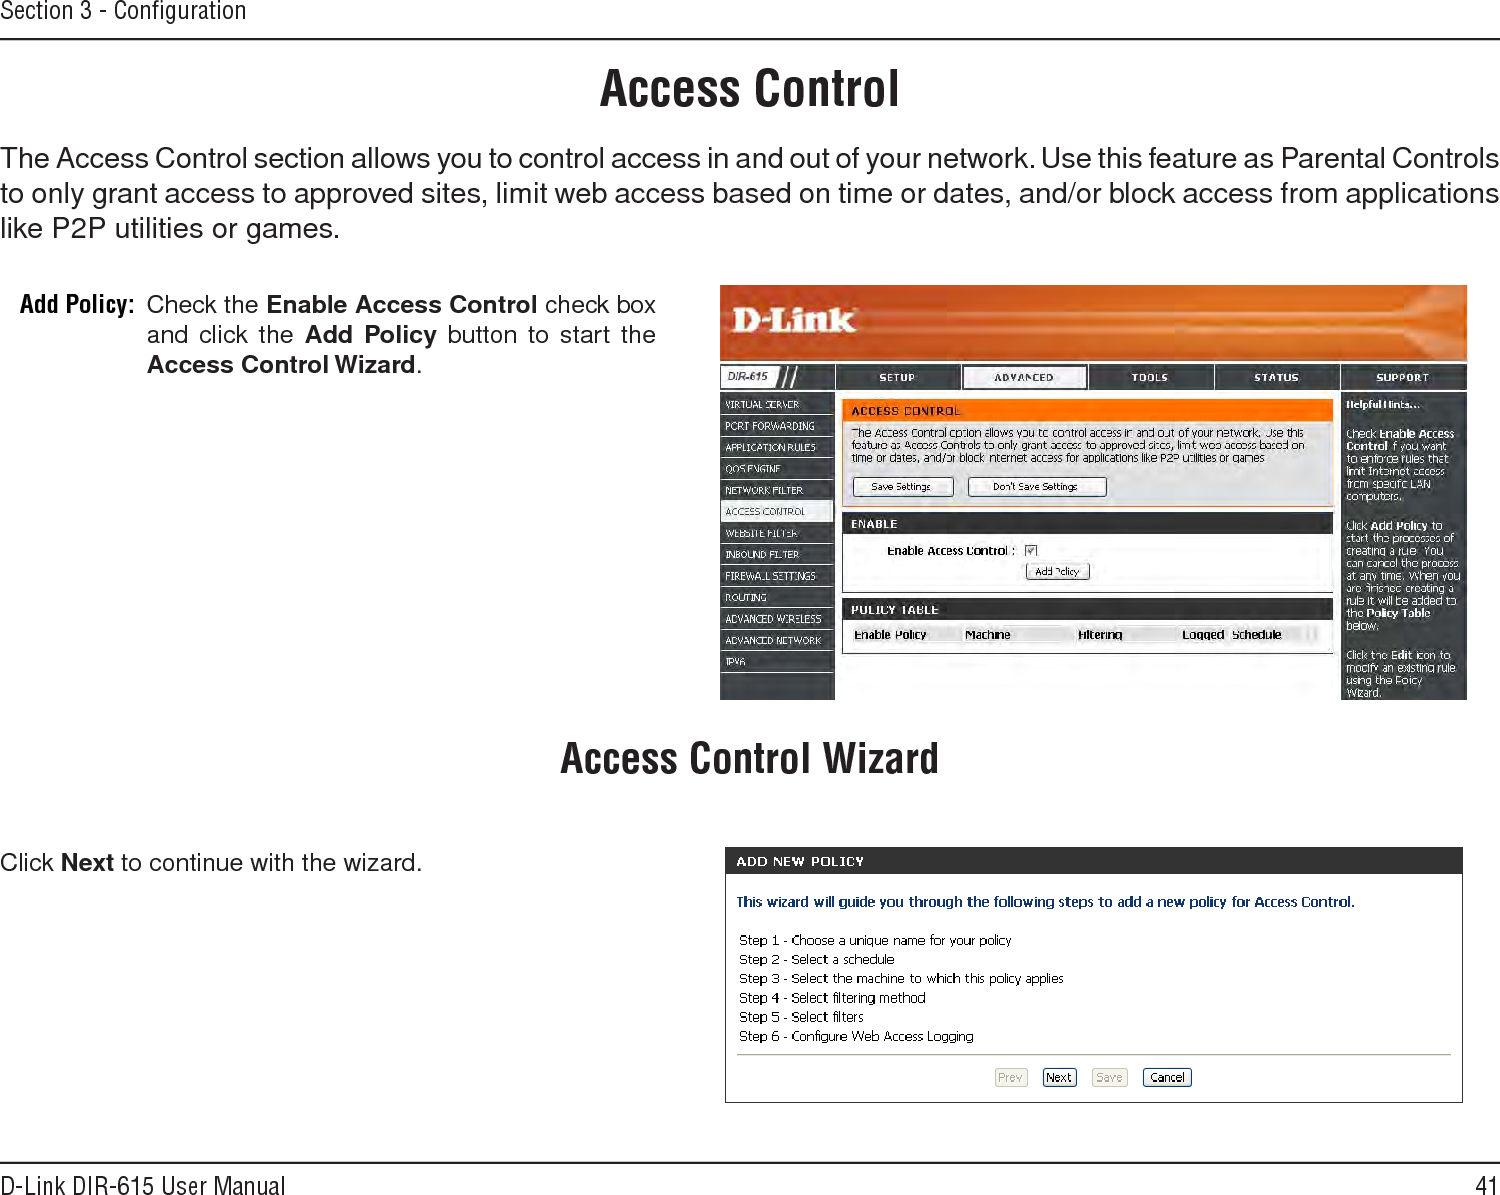 41D-Link DIR-615 User ManualSection 3 - ConﬁgurationAccess ControlCheck the Enable.Access.Control check box and click the Add.Policy button to start the Access.Control.Wizard. Add Policy:The Access Control section allows you to control access in and out of your network. Use this feature as Parental Controls to only grant access to approved sites, limit web access based on time or dates, and/or block access from applications like P2P utilities or games.Click Next to continue with the wizard.Access Control Wizard